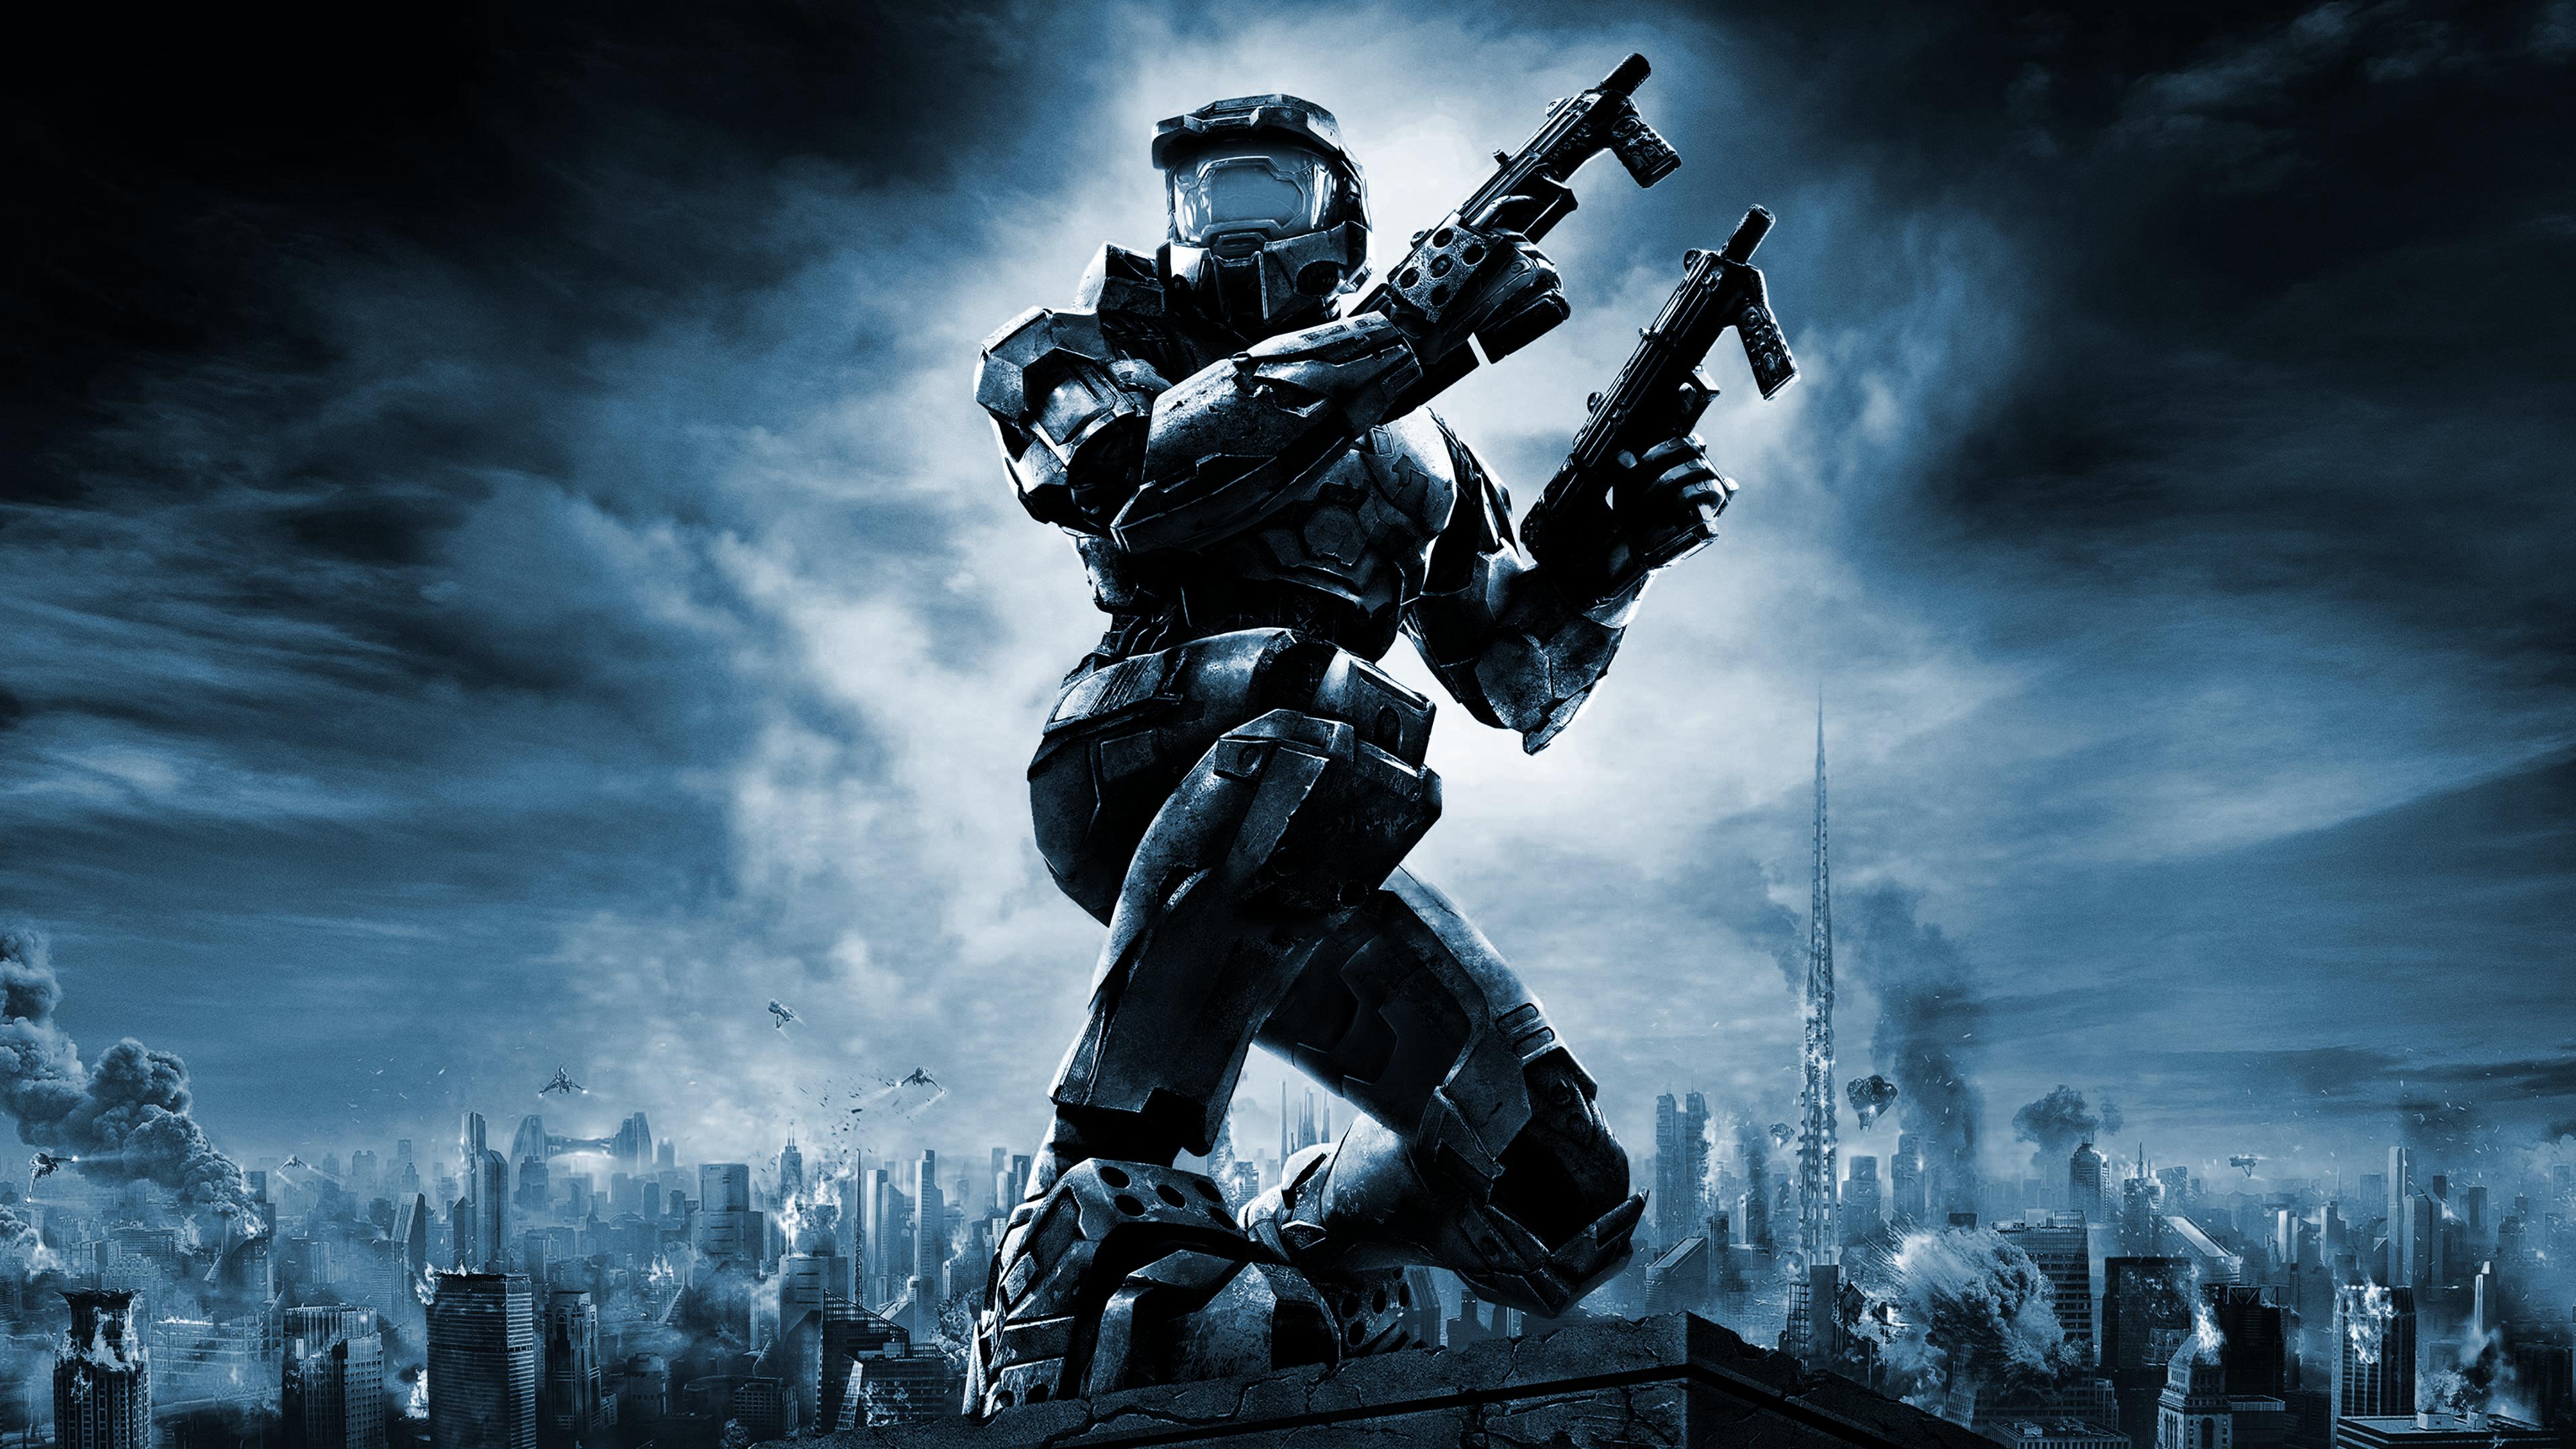 Menu Background Pack at Halo: The Master Chief Collection Nexus and community